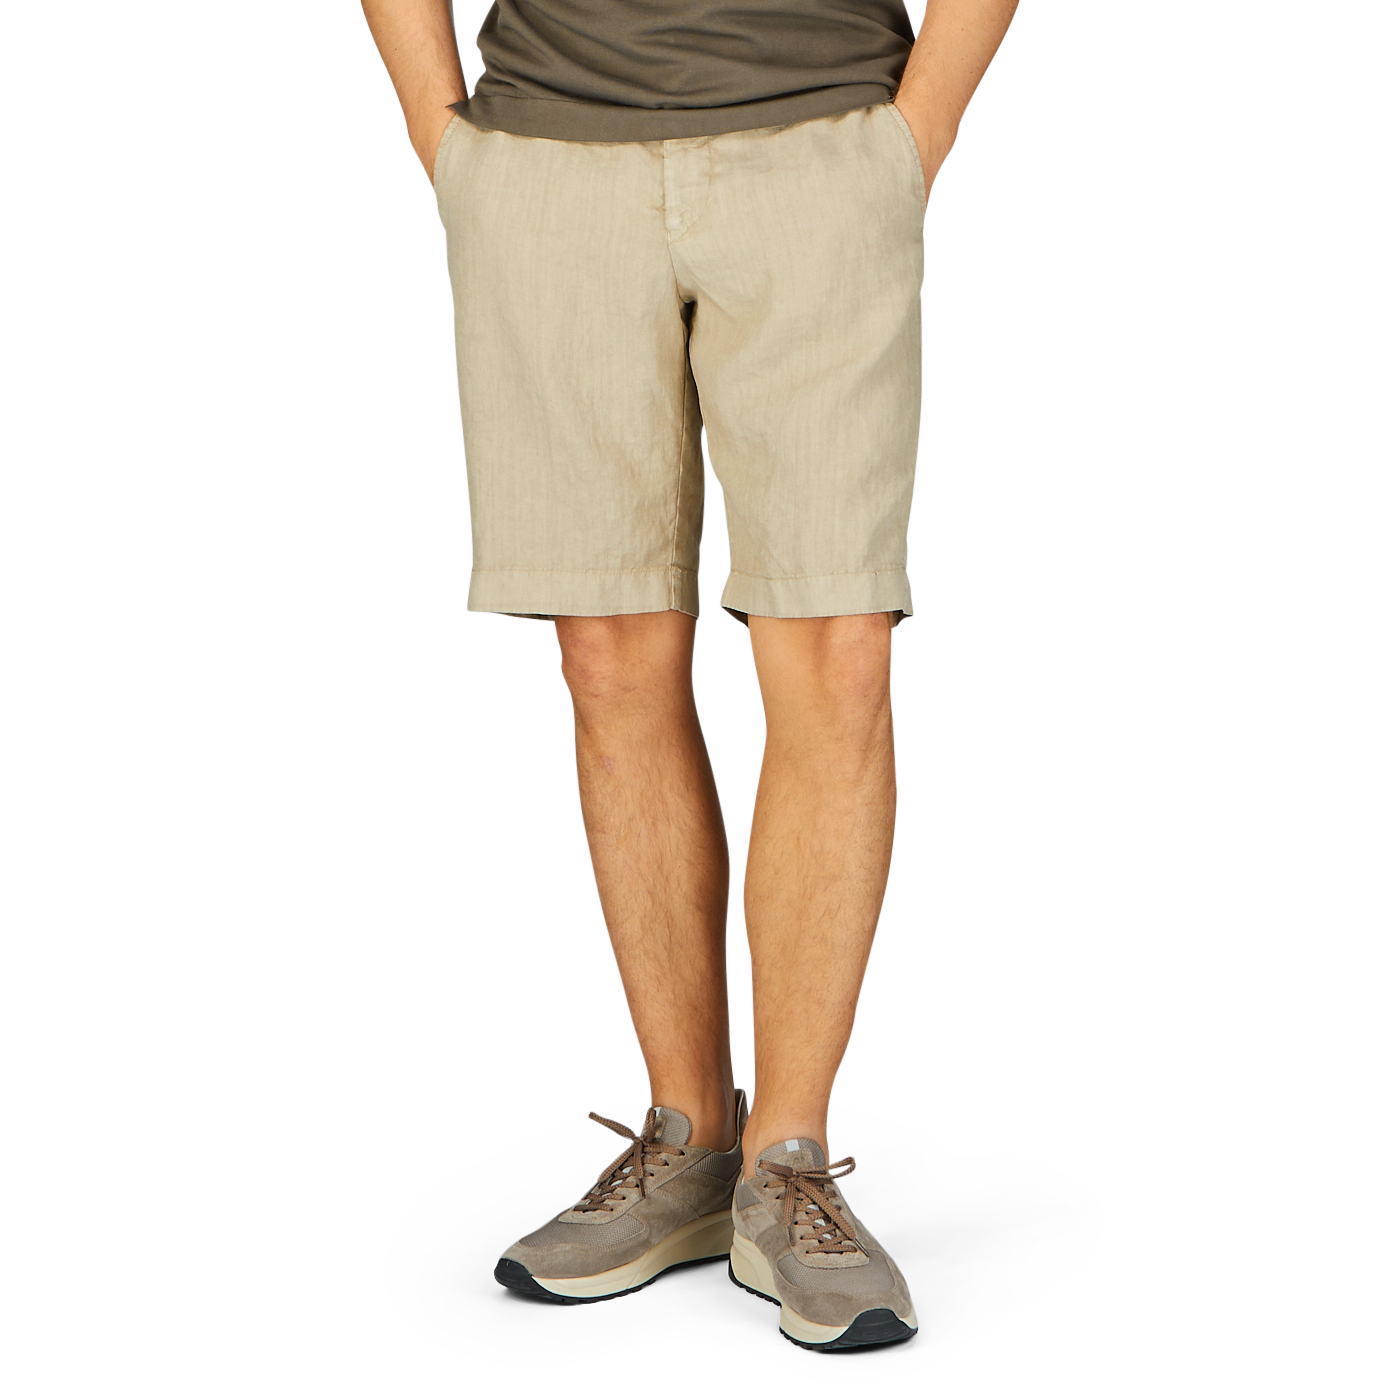 Person wearing contemporary fit, Berwich beige washed linen drawstring shorts and casual sneakers standing against a plain background.